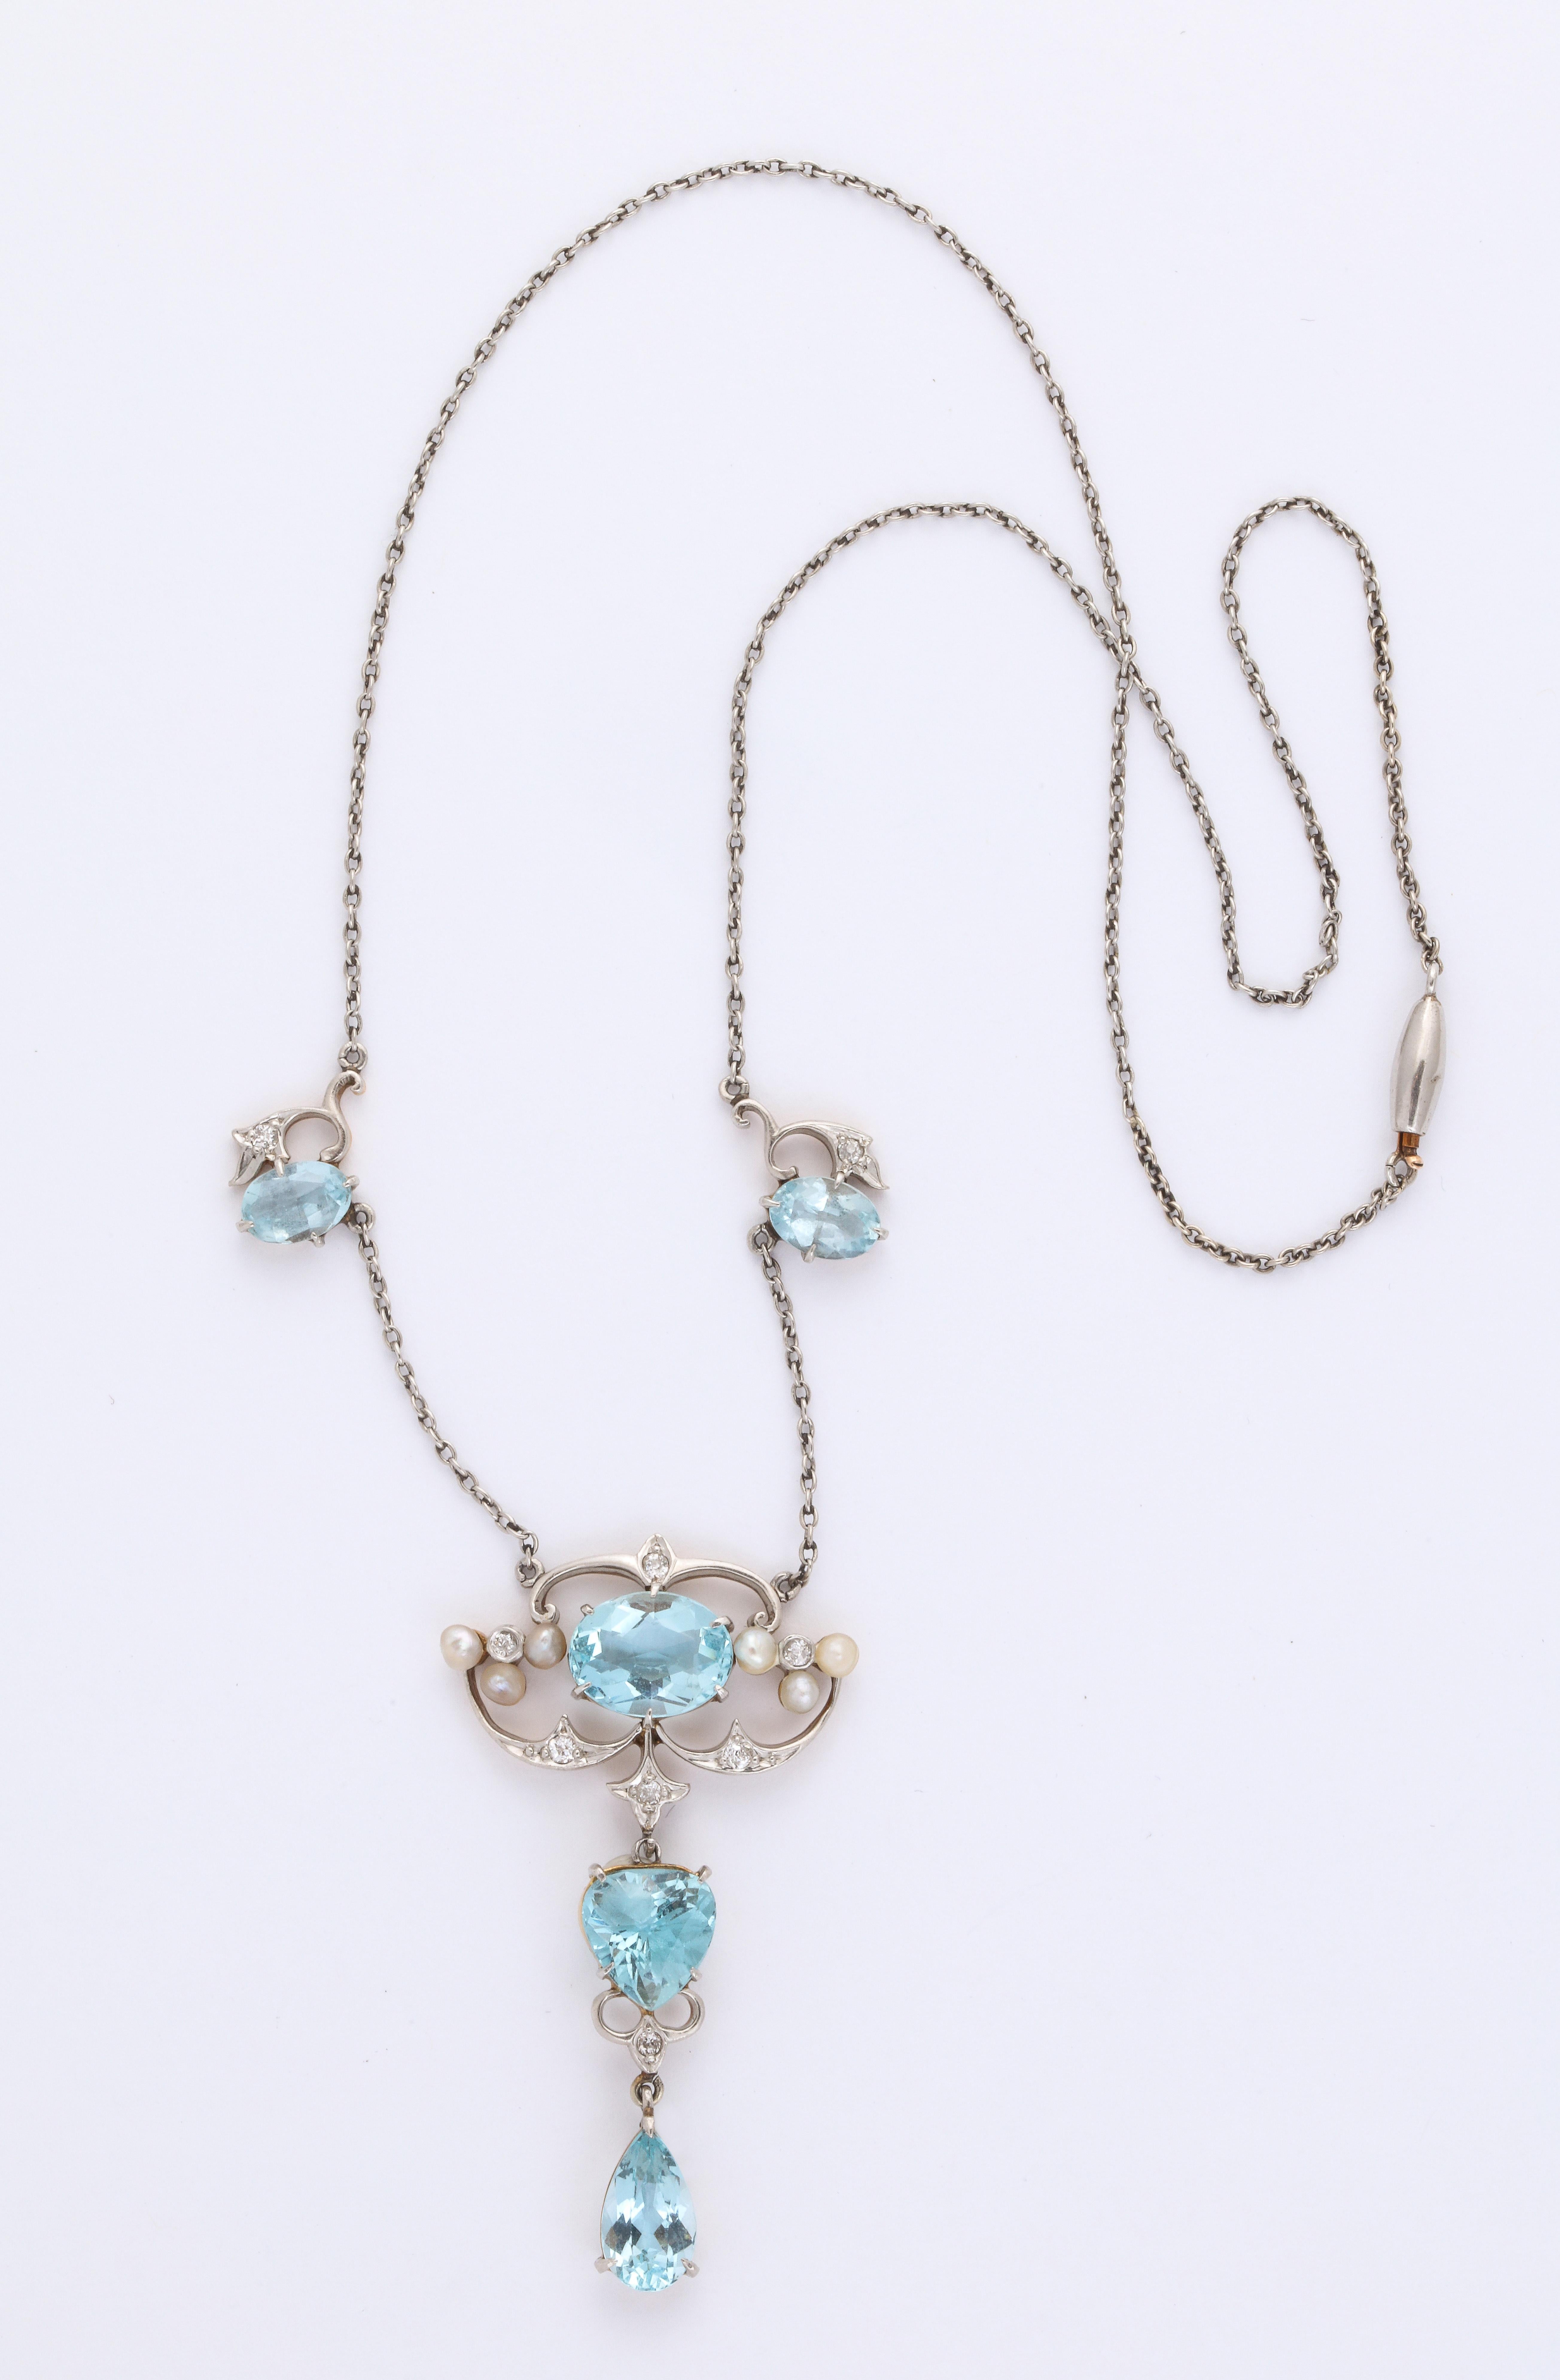 A beautiful Antique Aquamarine and Diamond necklace with a center pendant comprised of three different cuts of Aquamarines oval pear teardrop and old mine cut diamonds.  A delicate design set in platinum  with two smaller Aquamarines, spaced on